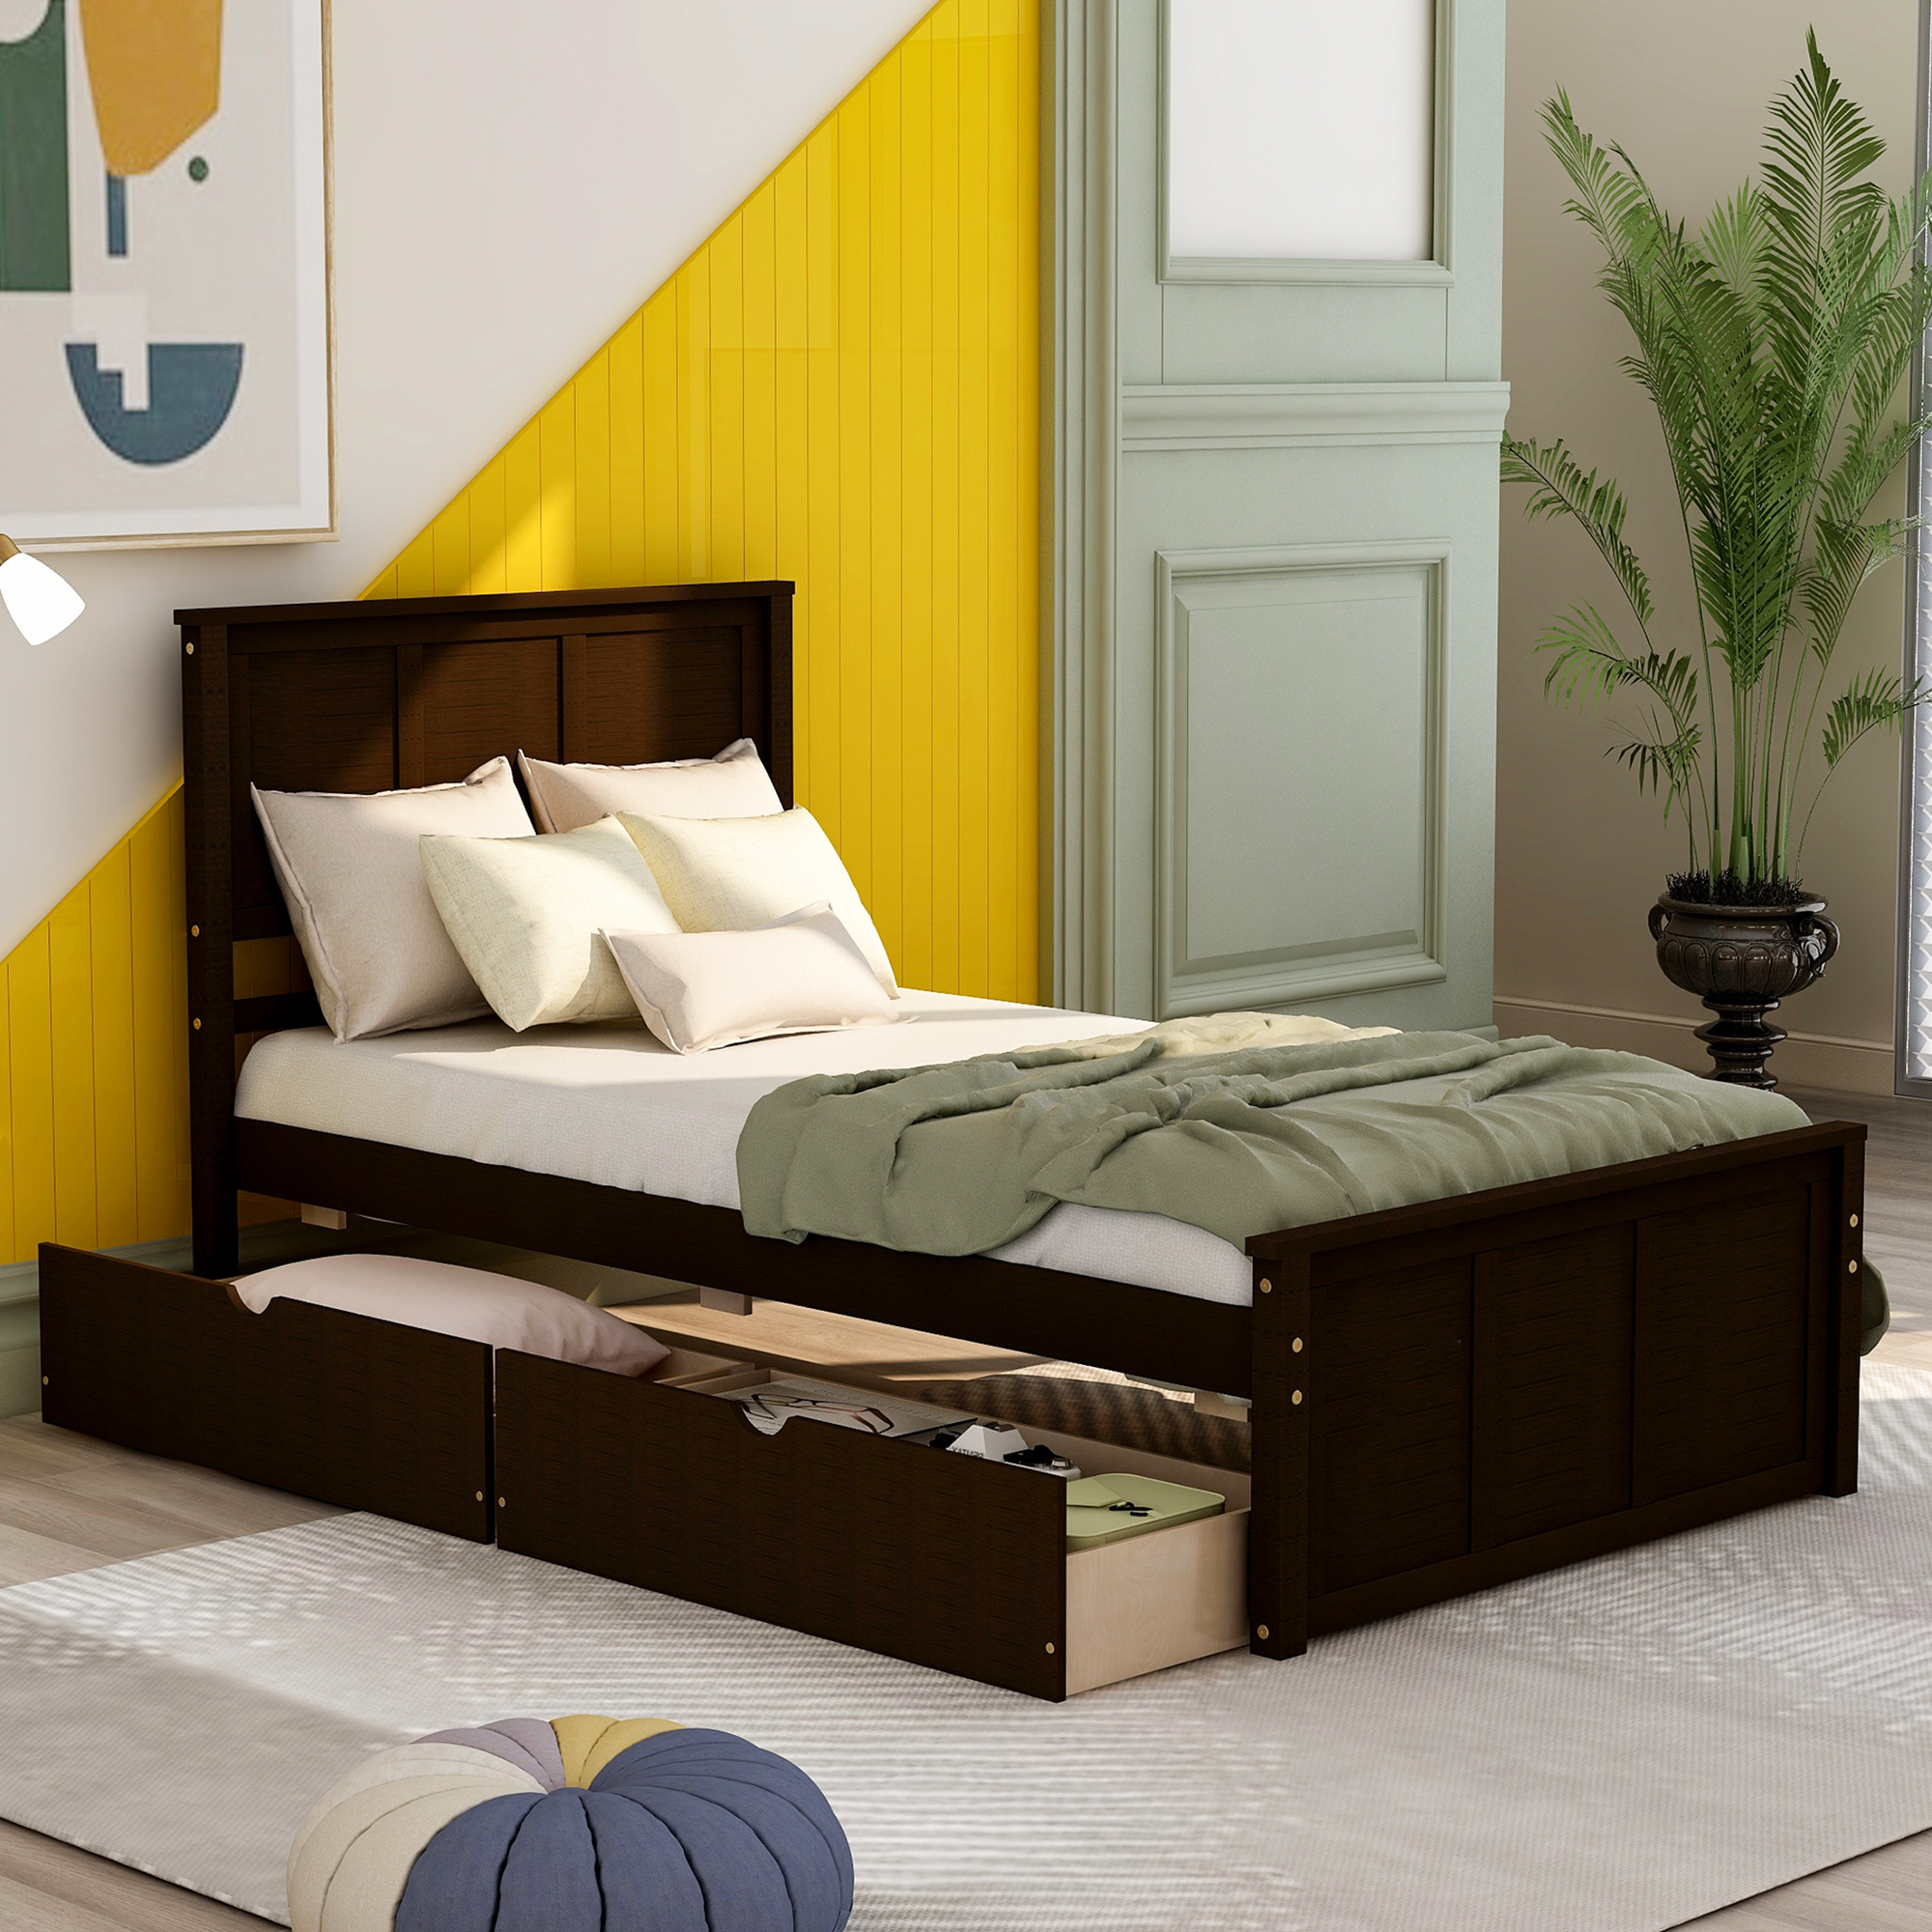 Euroco Wood Twin Platform Bed with Headboard & 2 Storage Drawers for Kids, Espresso - image 1 of 10